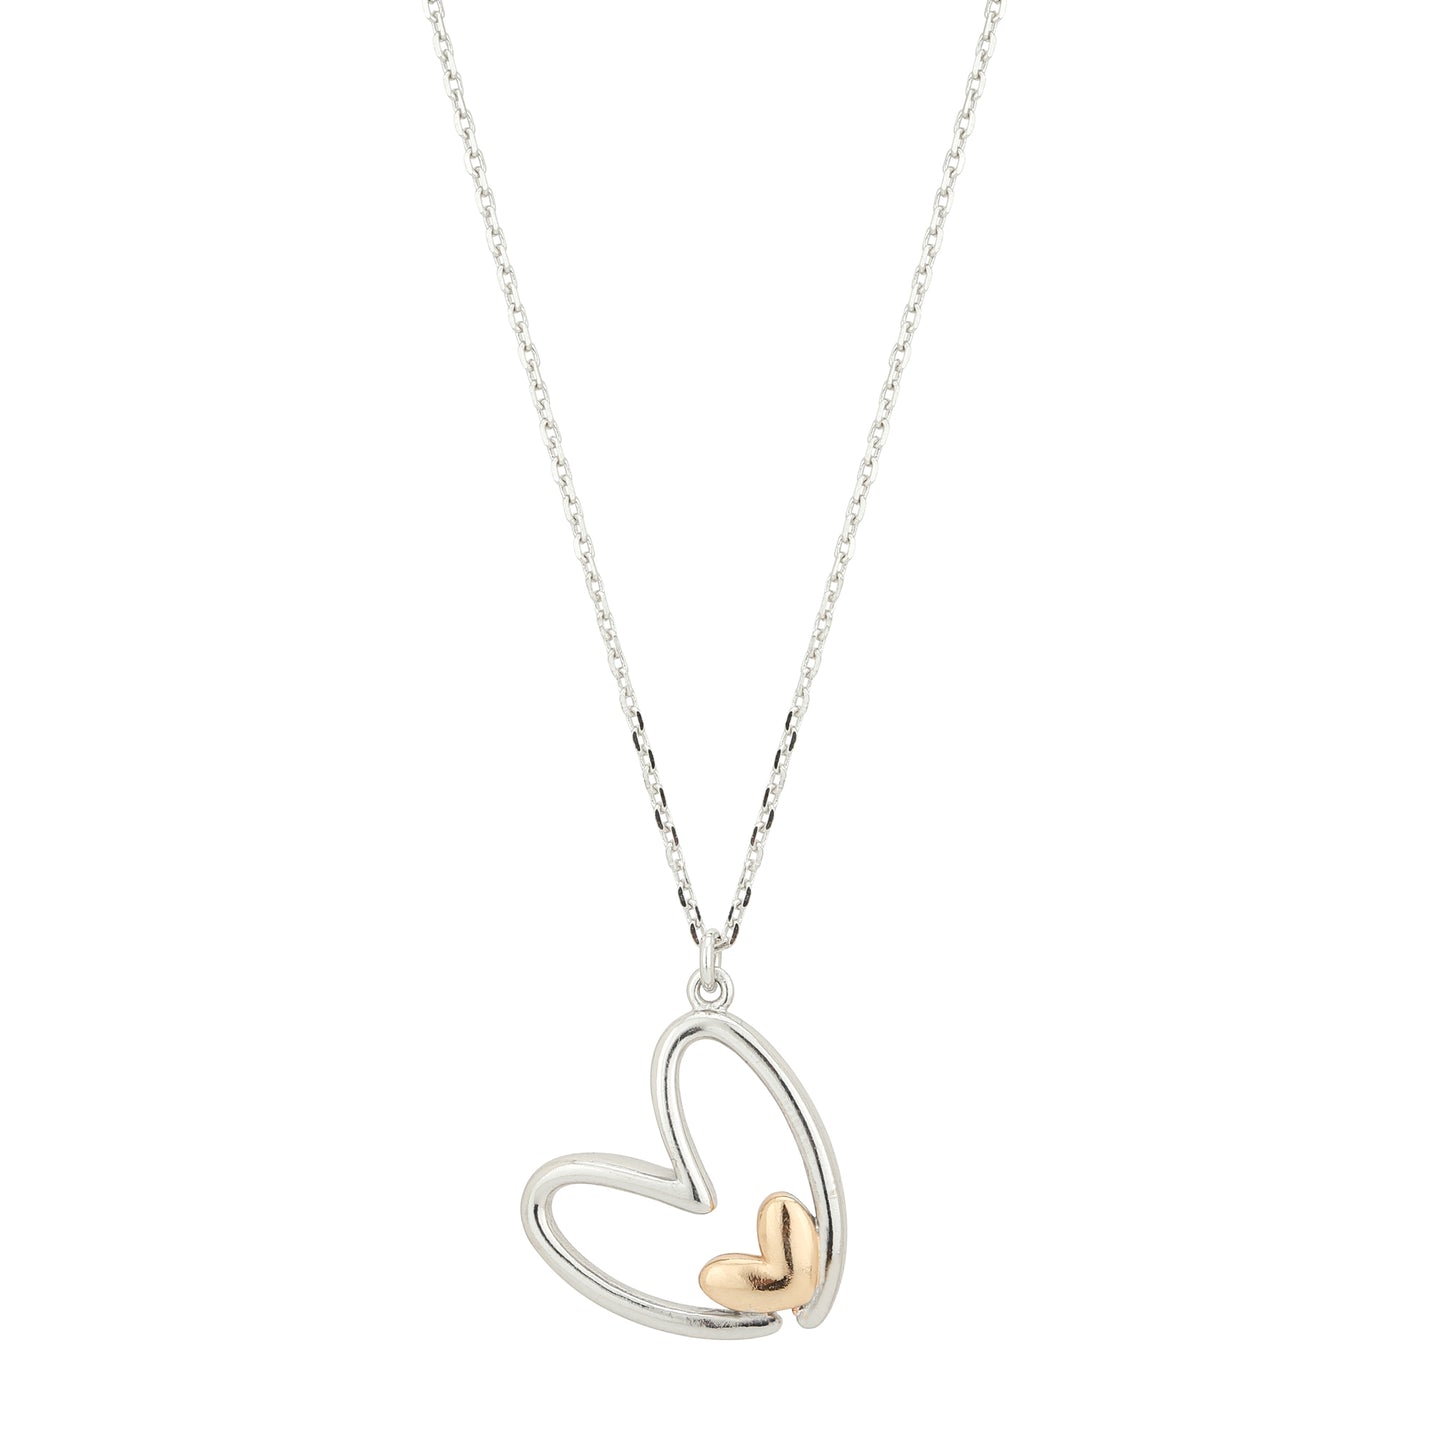 Carlton London Silver and Rose Gold Love Heart Pendant Charm Necklace